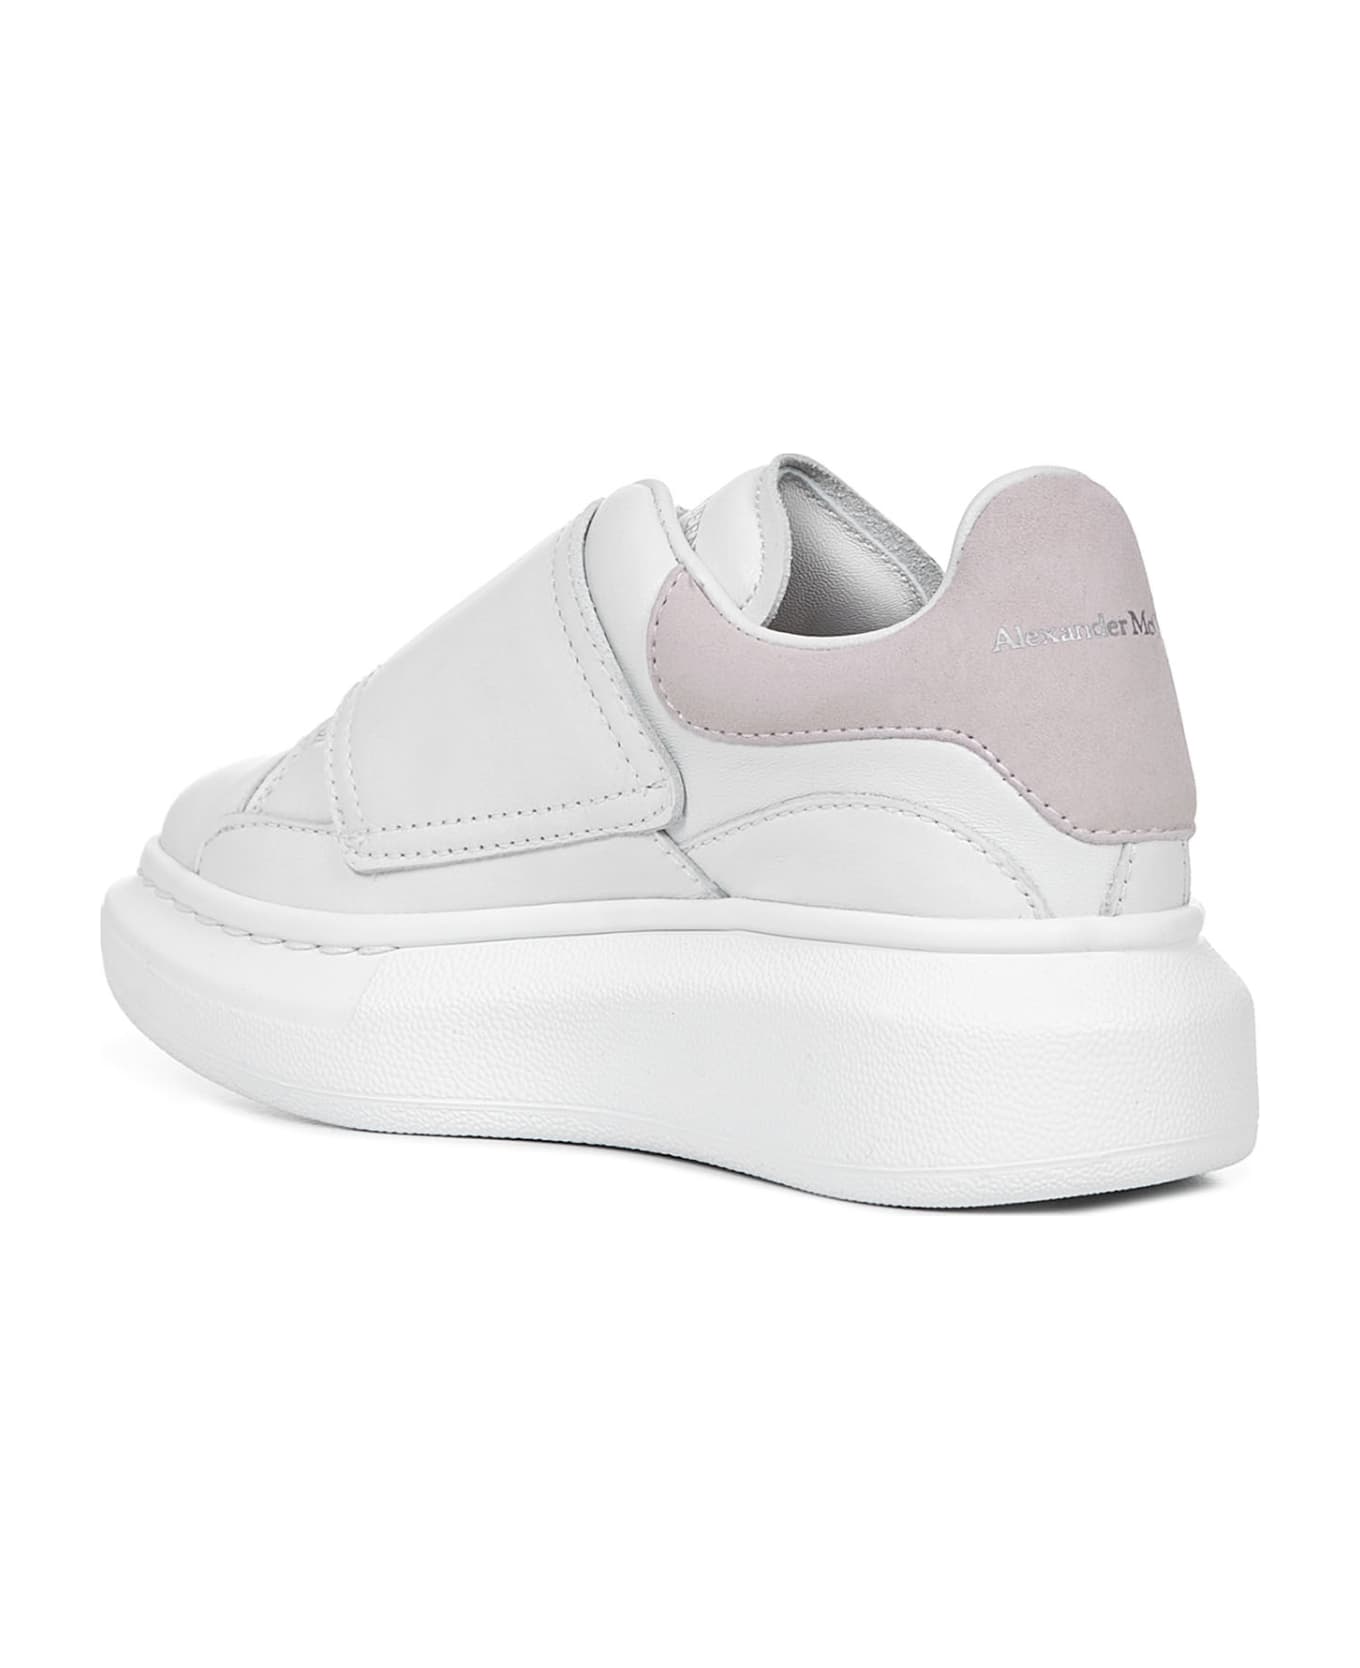 Alexander McQueen Molly Sneakers - White/pink